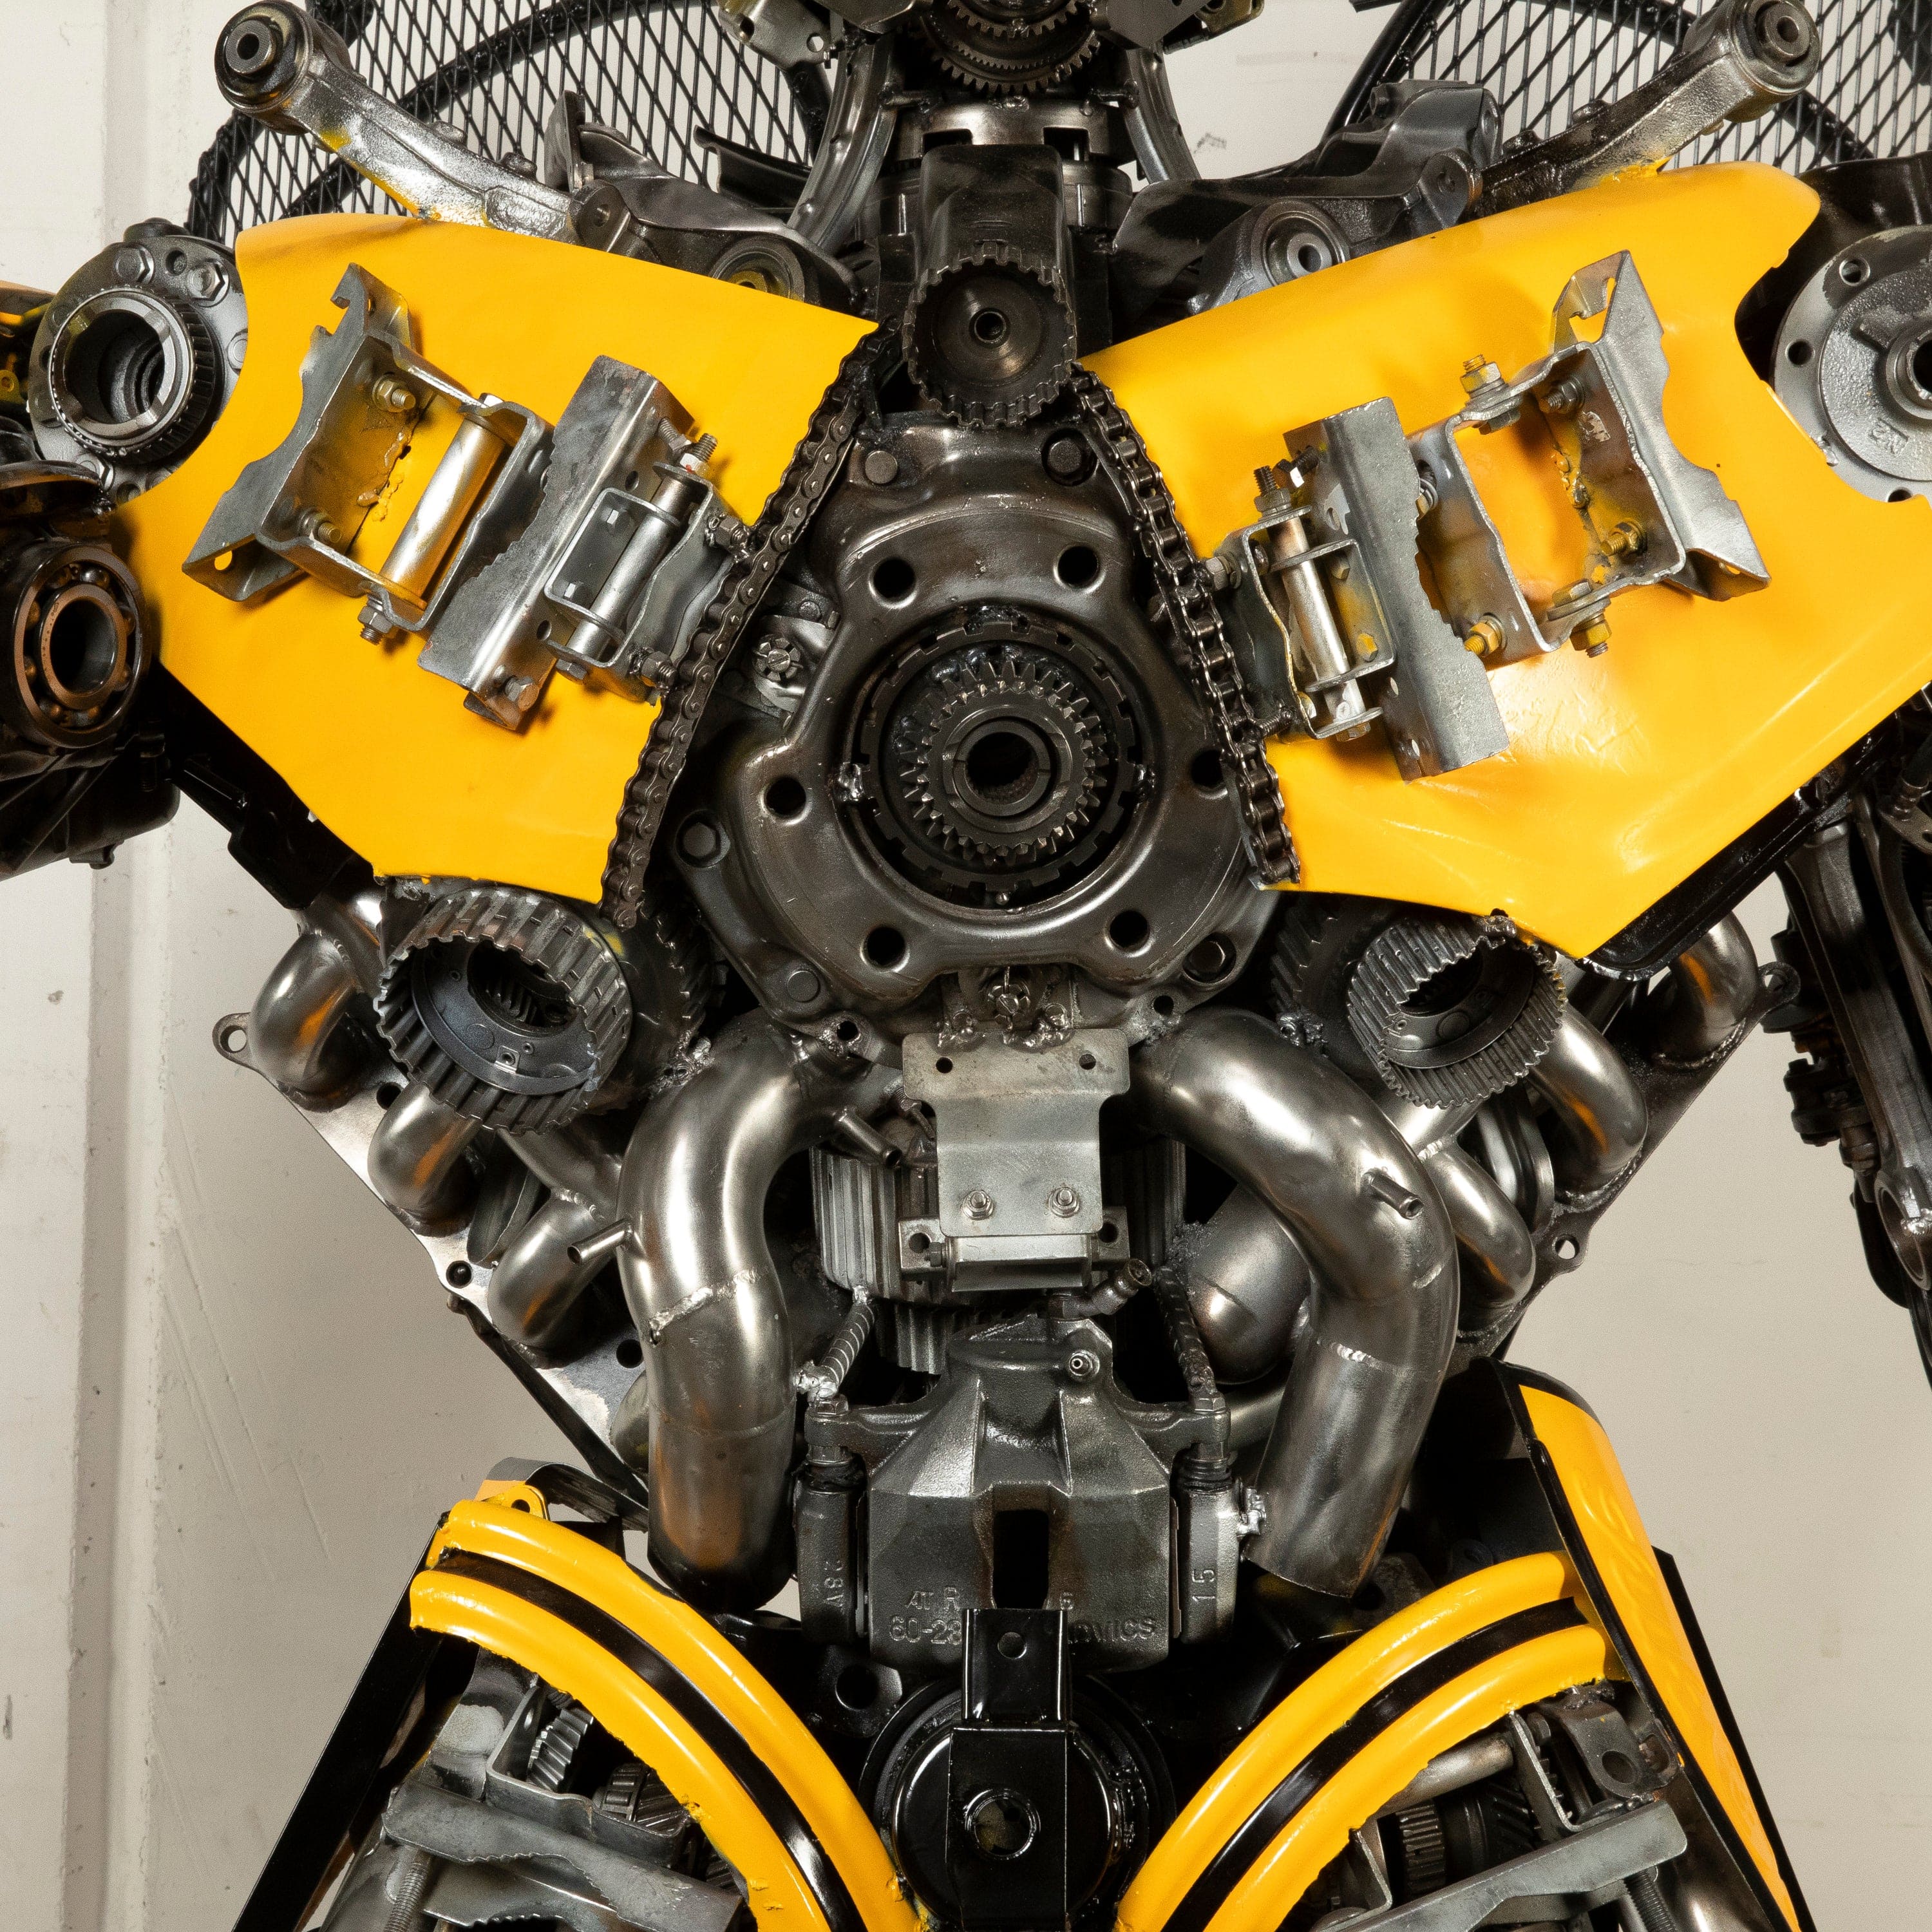 Kalifano Recycled Metal Art 91" Bumblebee Inspired Recycled Metal Art Sculpture RMS-BB230-S29